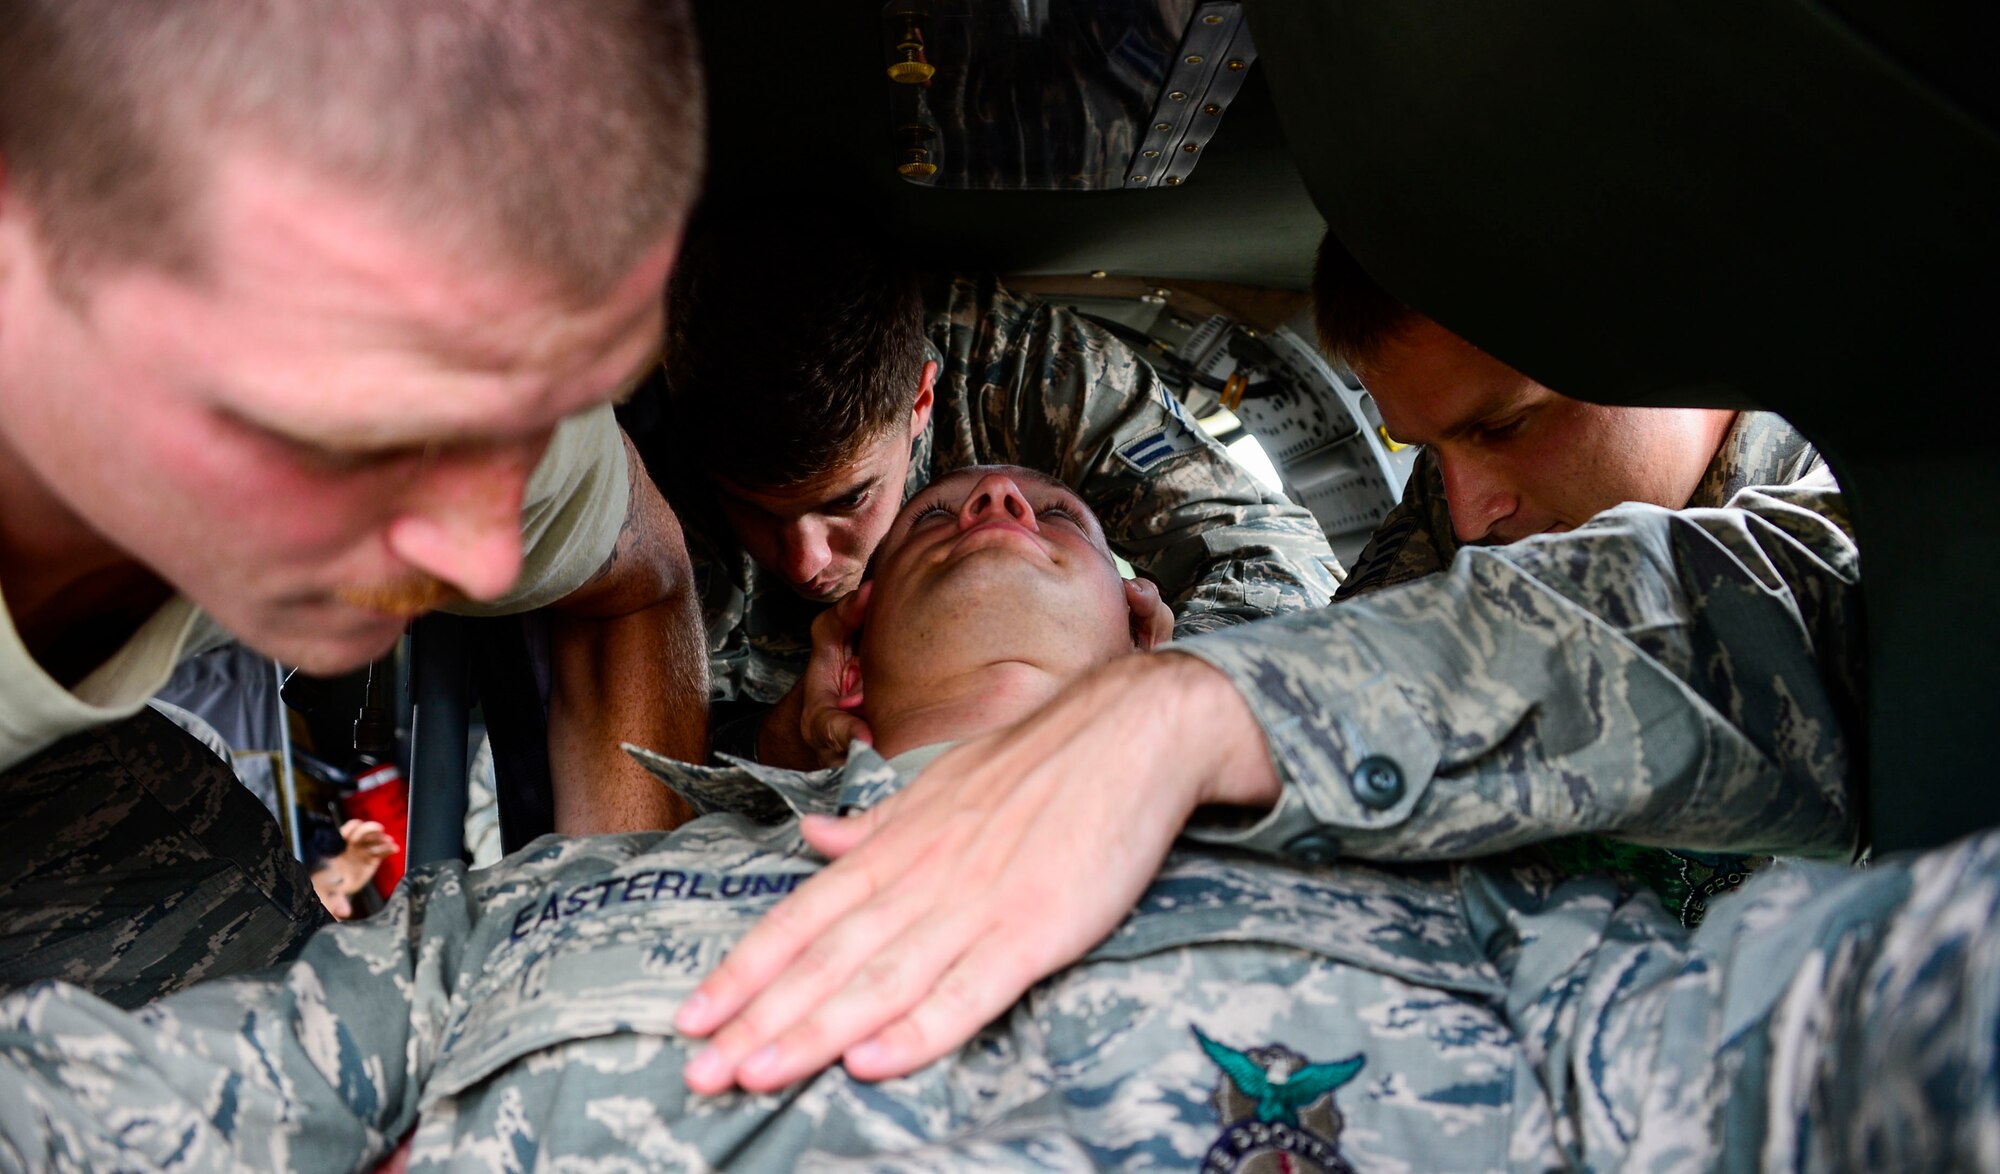 Members from the 612th Air Base Squadron Fire Department work together to extract U.S. Air Force Staff Sgt. Daniel Easterlund, 612th Air Base Squadron firefighter, from a UH-60 Blackhawk helicopter during aircraft crash rescue training at Soto Cano Air Base, Honduras, Jan. 15, 2015.  At least once a quarter, the 612th ABS teams up with the 1-228th Aviation Regiment to review aircraft crash rescue training and emergency procedures for the UH-60 Blackhawk helicopter. (U.S. Air Force photo/Tech. Sgt. Heather Redman)